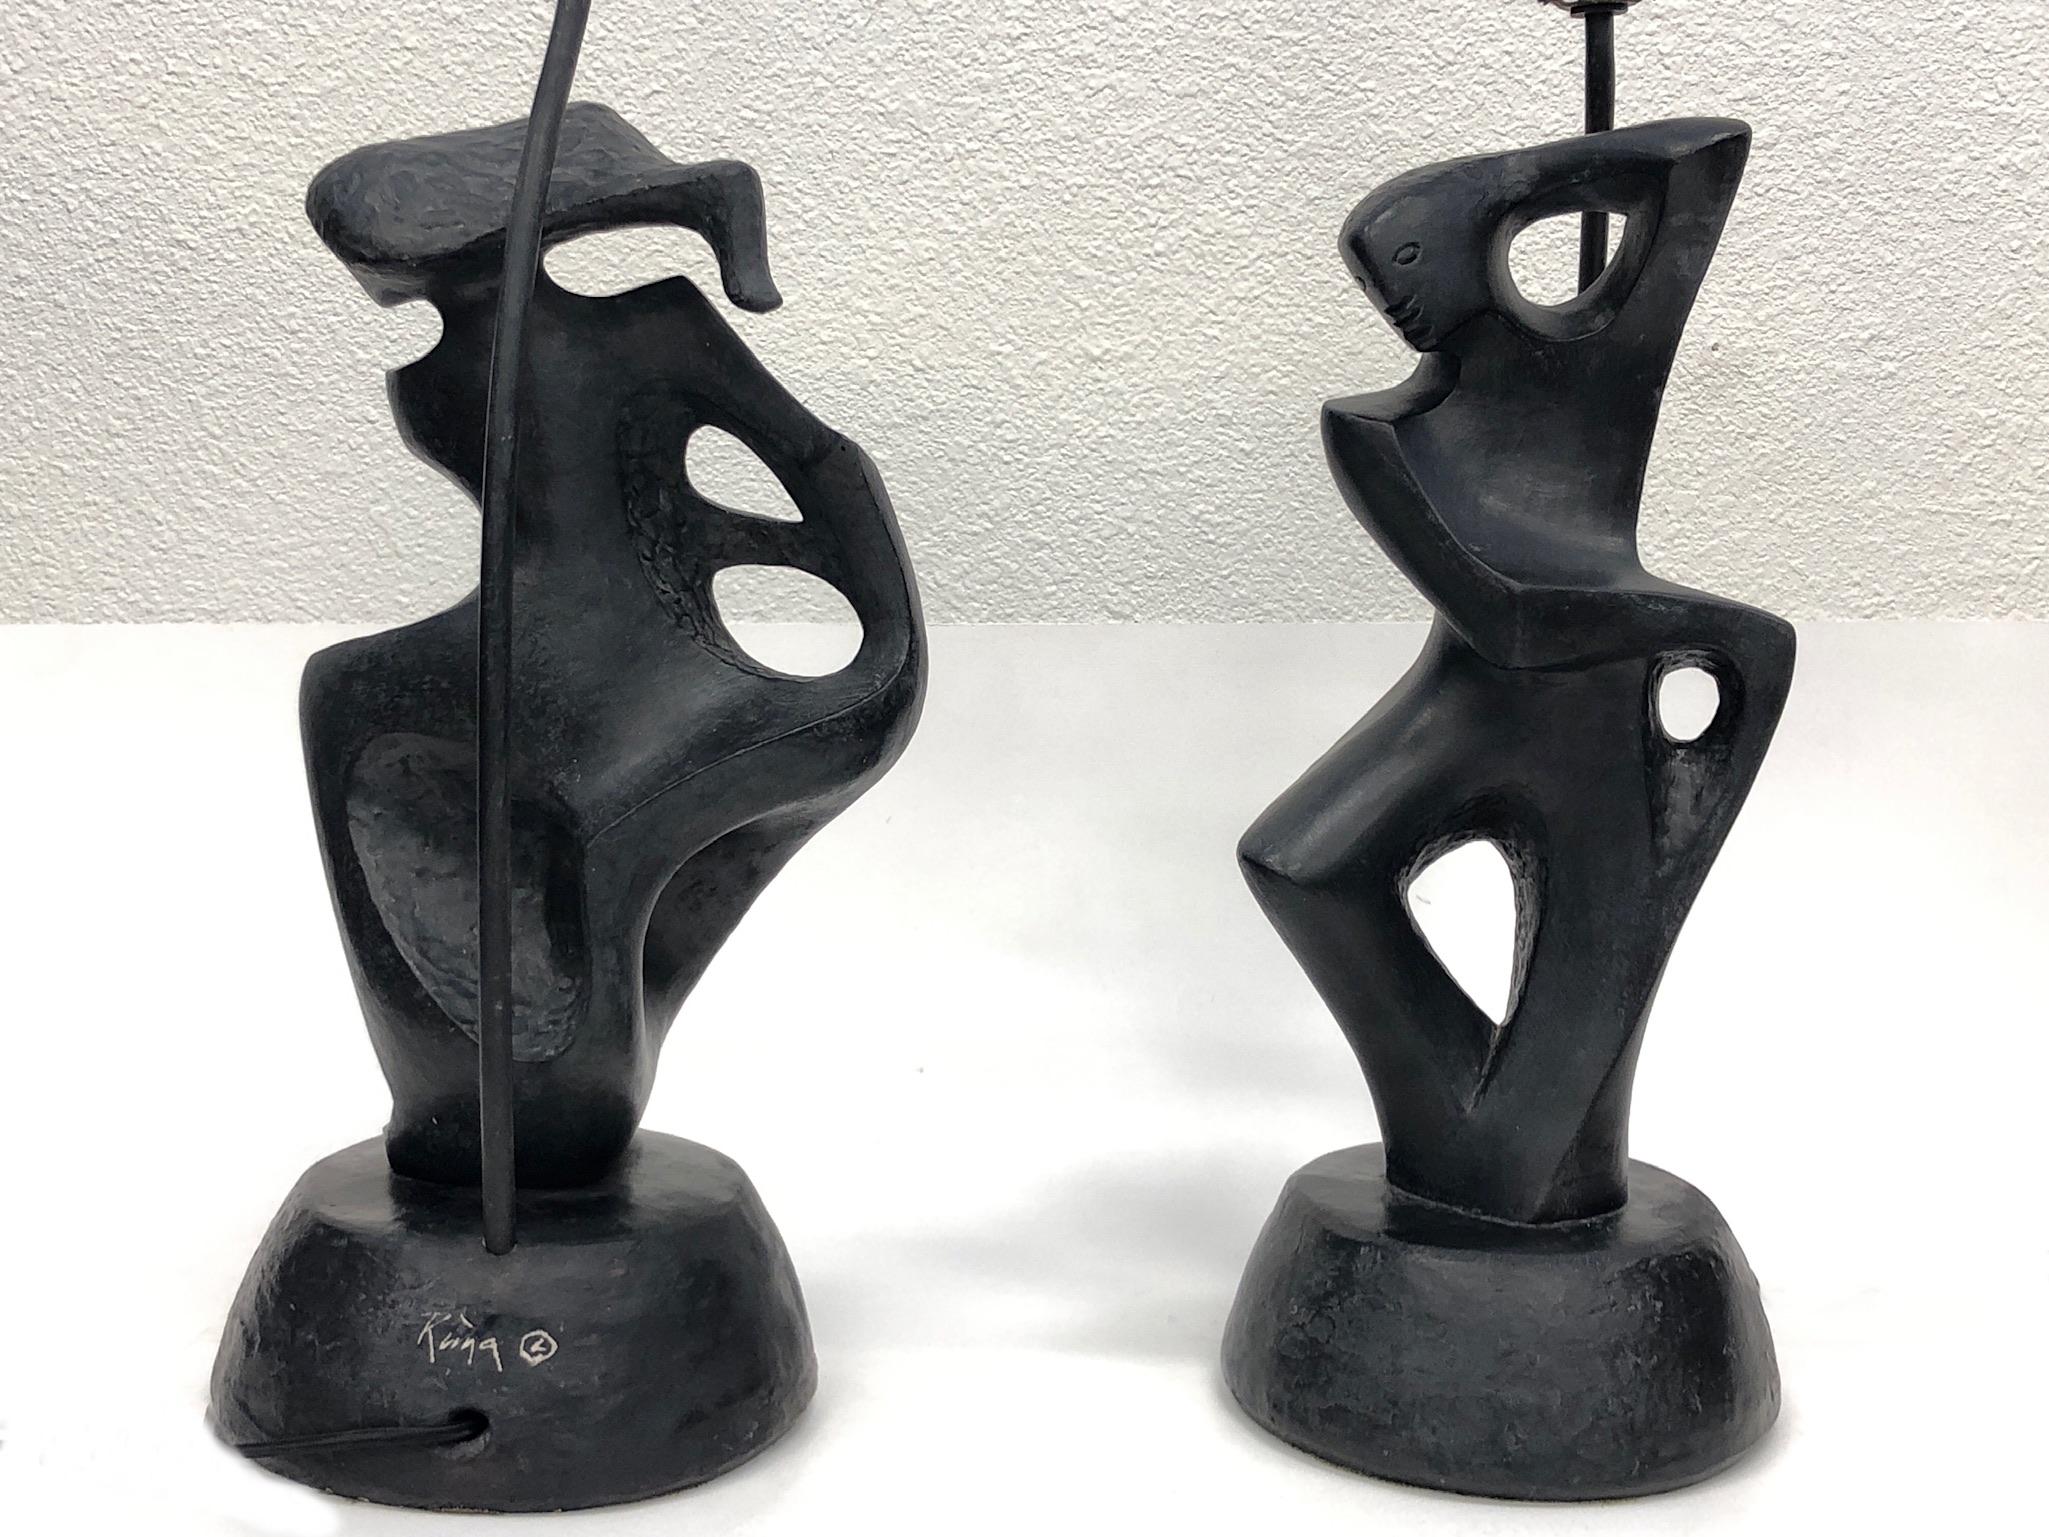 Silk Pair of Black Lacquered Sculptural Table Lamps by Marianna von Allesch for RIMA